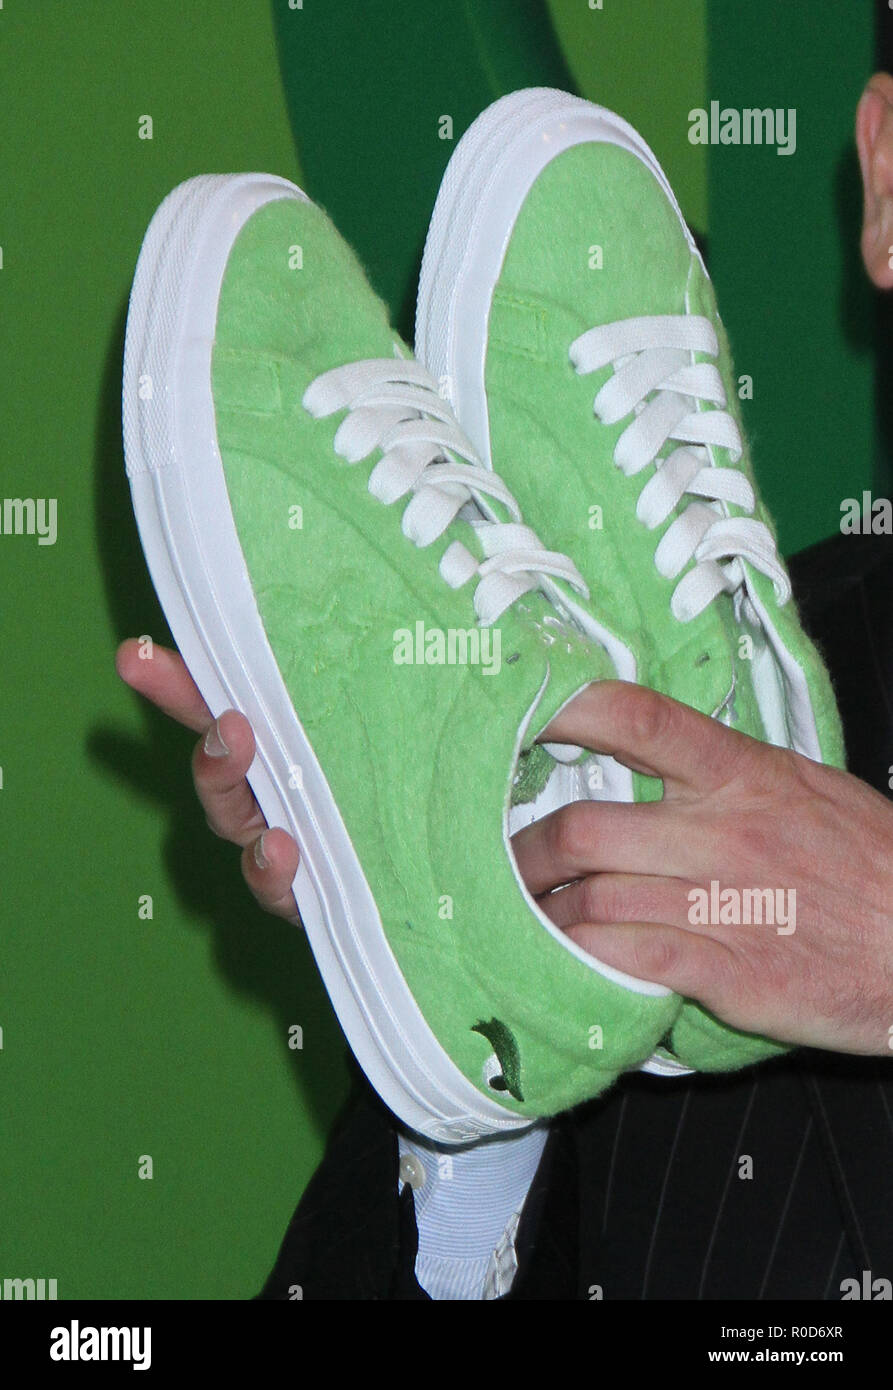 golf le fleur the grinch,welcome to buy,whathifi.in